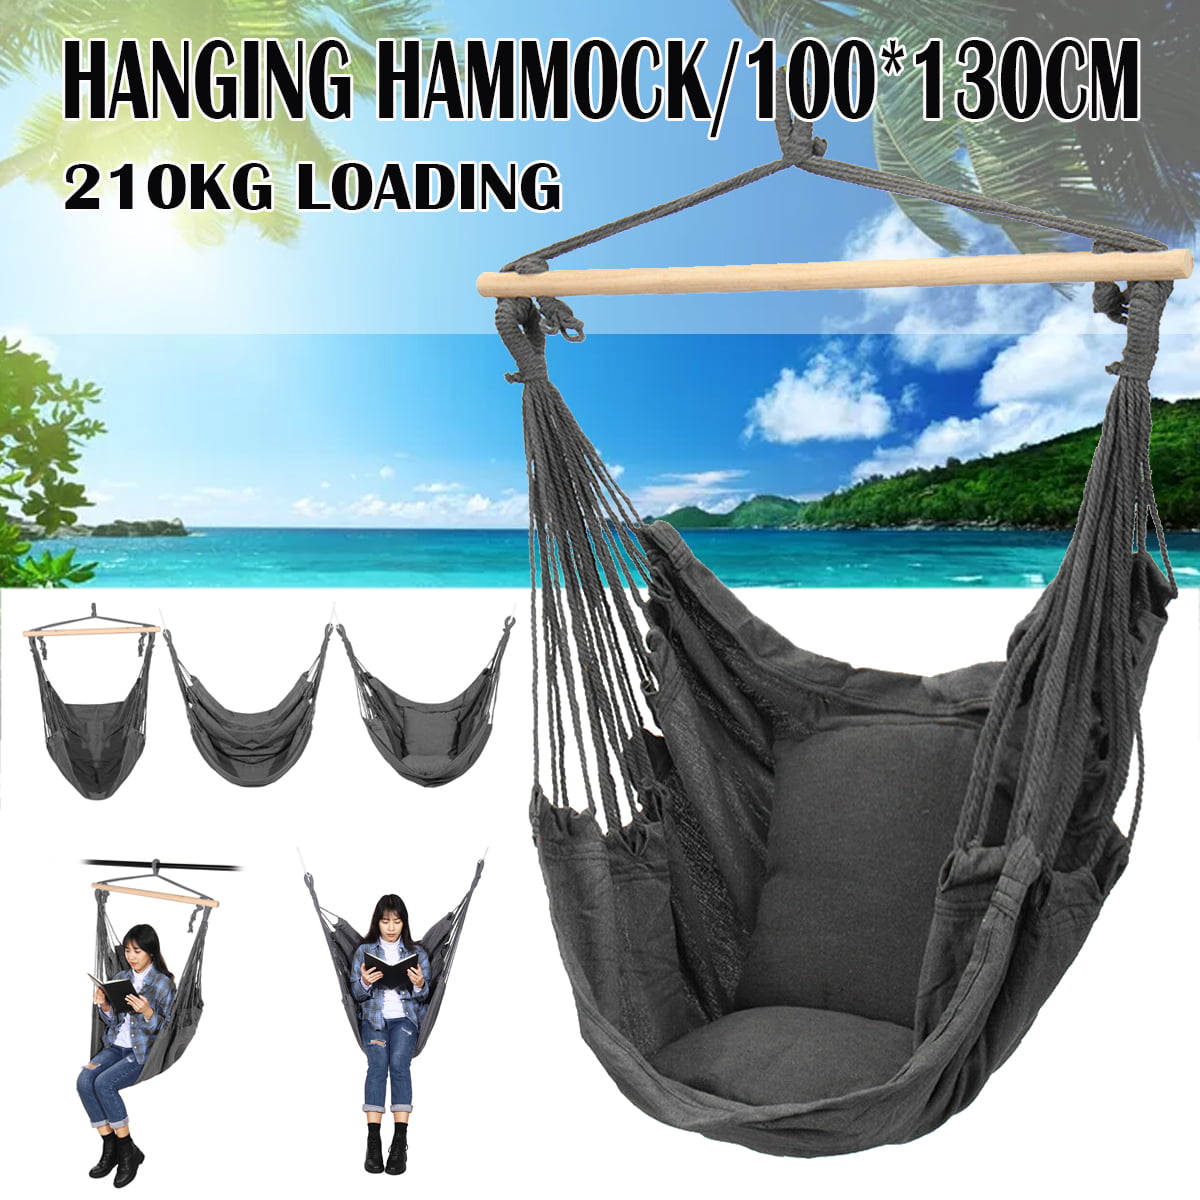 Hammock Chair Hanging Rope Swing-Max 463 Lbs-2 Cushions Included-Large Macrame Hanging Chair with Pocket- Quality Cotton Weave for Superior Comfort & Durability